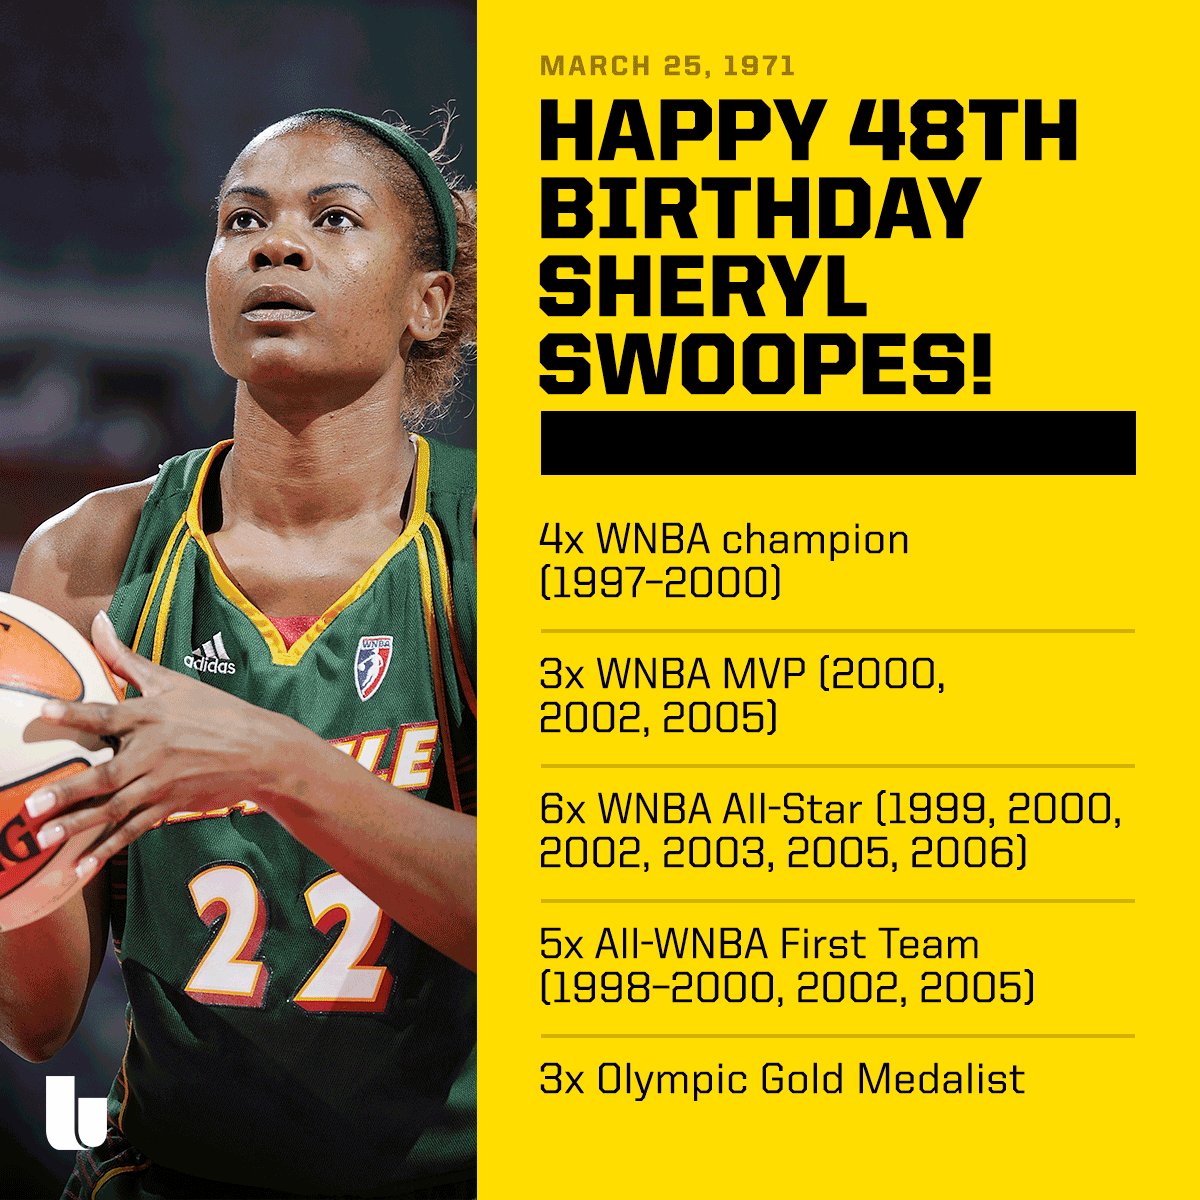 Happy Birthday to a women s basketball legend, Sheryl Swoopes! 